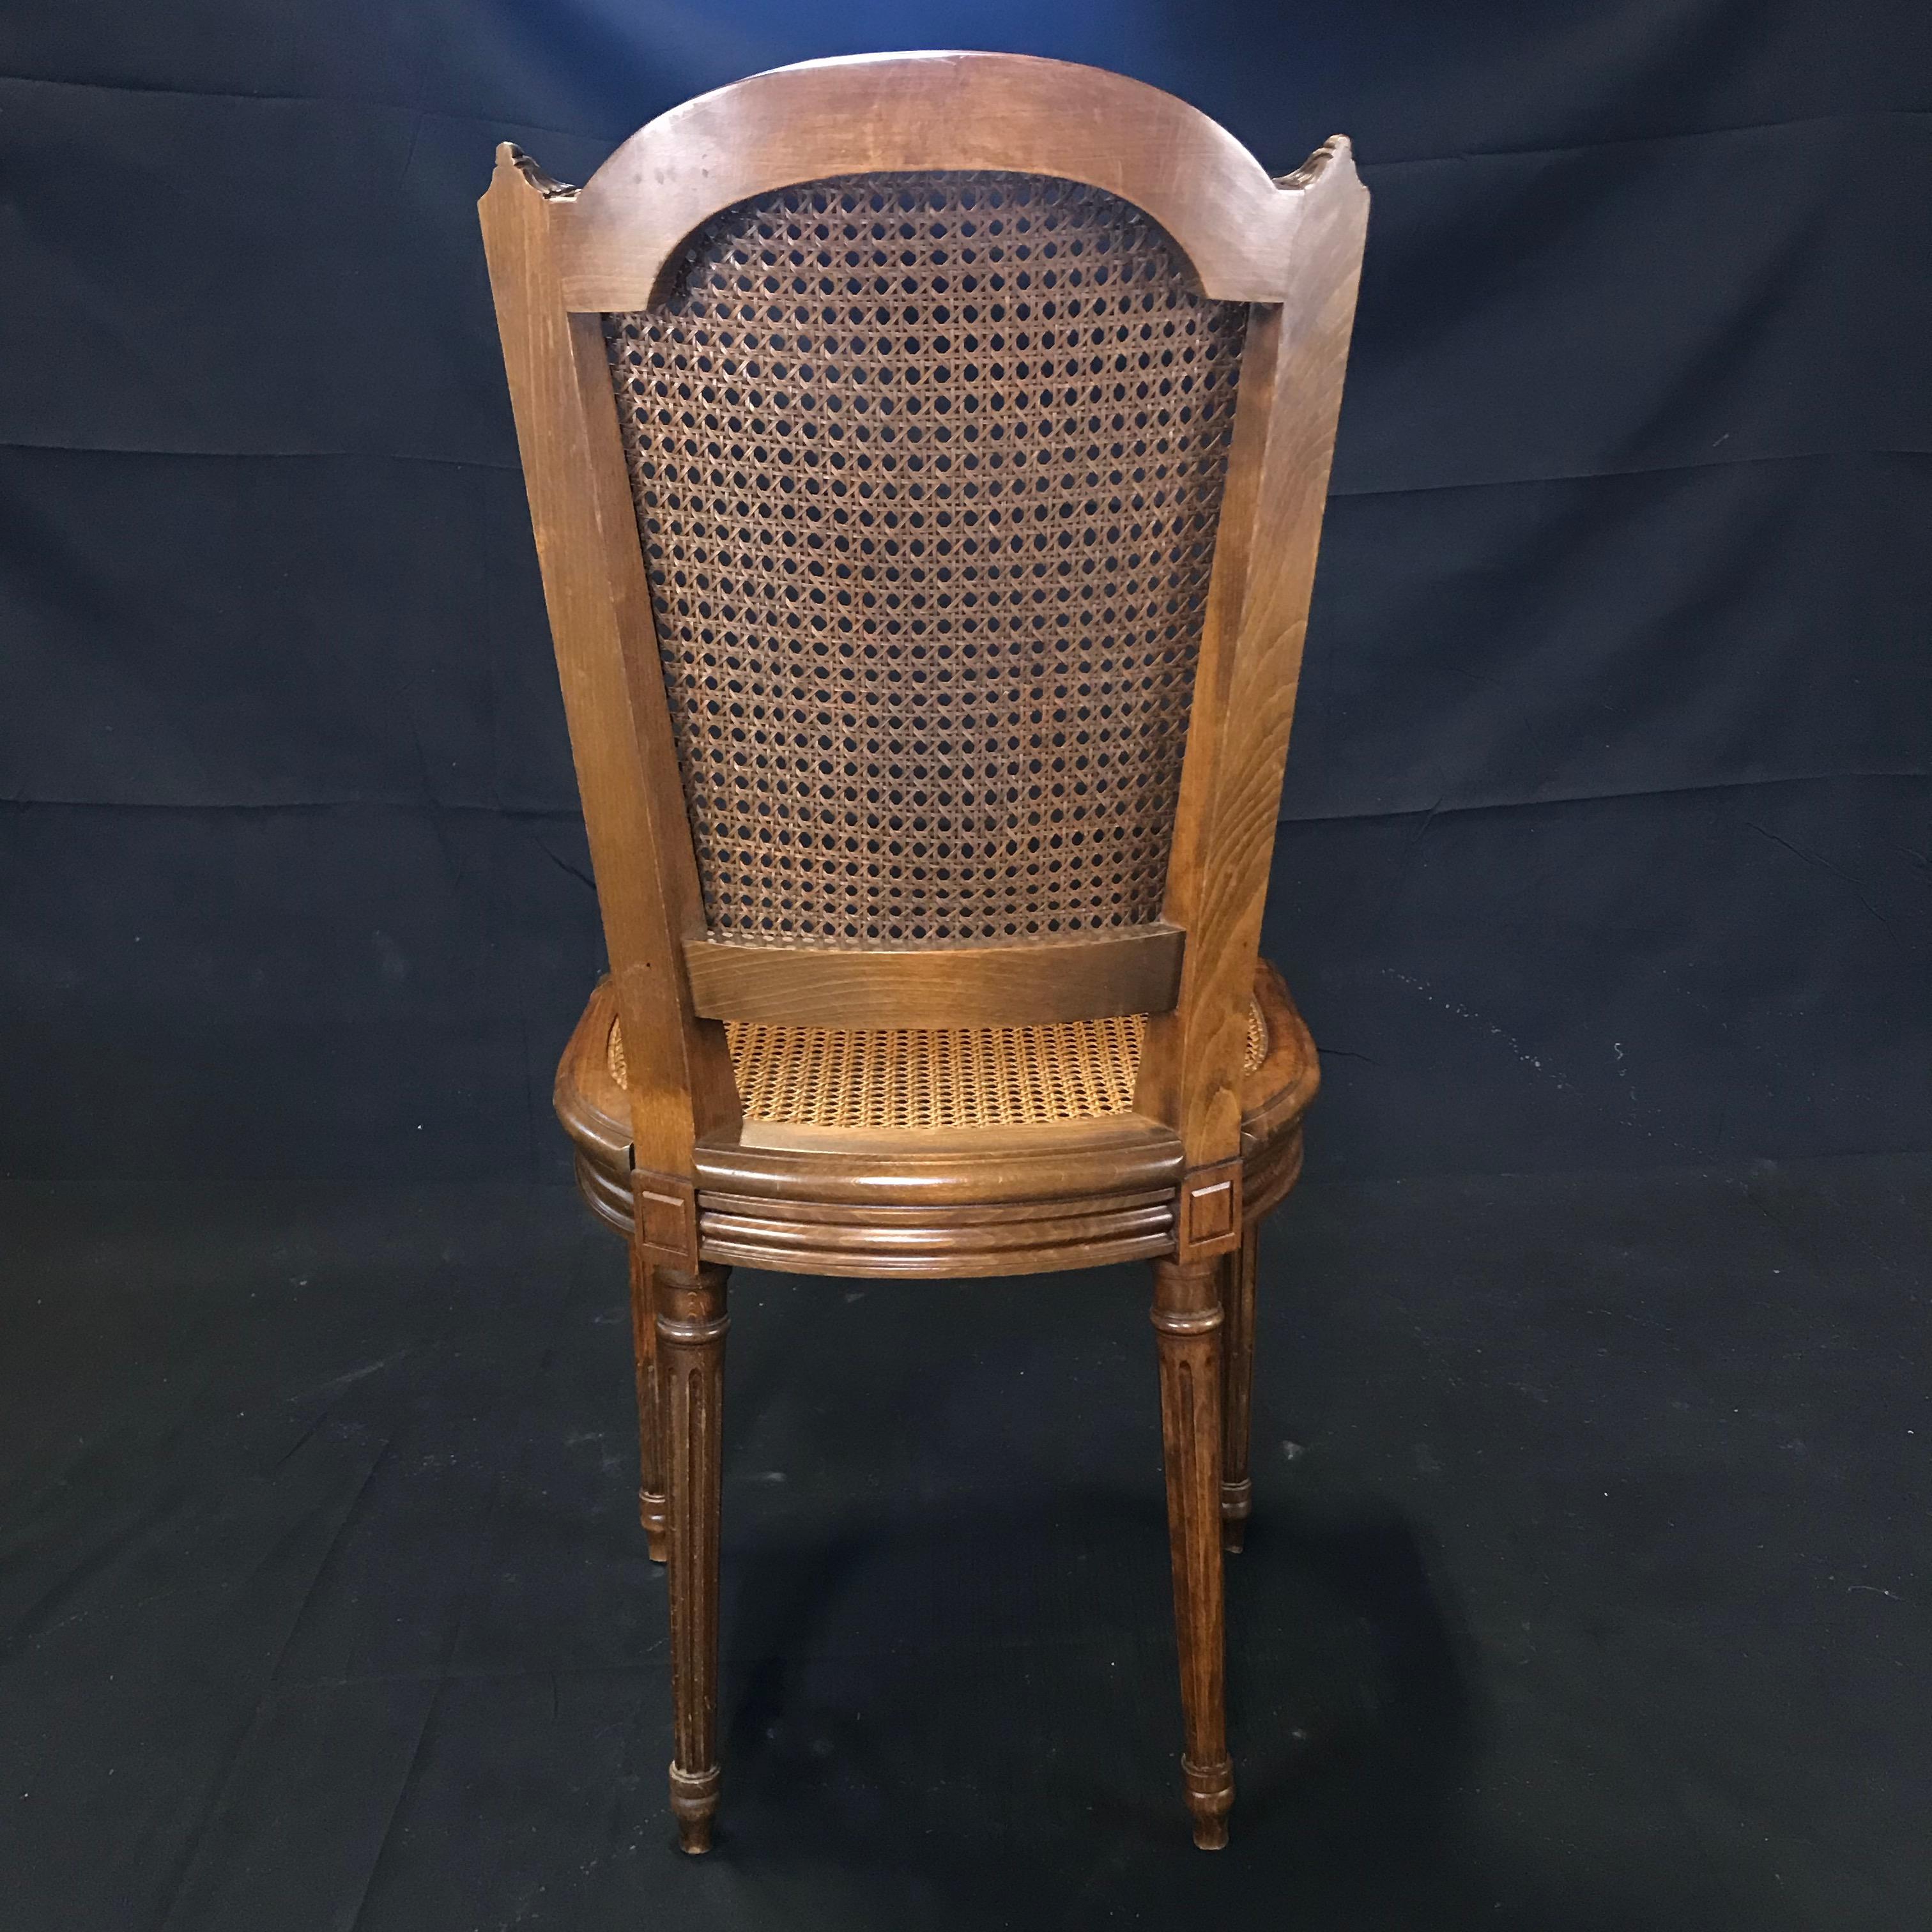 A classically beautiful set of French Louis XVI style chairs, bought in Lyon, France having cane backs and seats, light walnut frames, reeded tapering legs and handsome carved wood details. One cane seat has very minor damage on the front of the